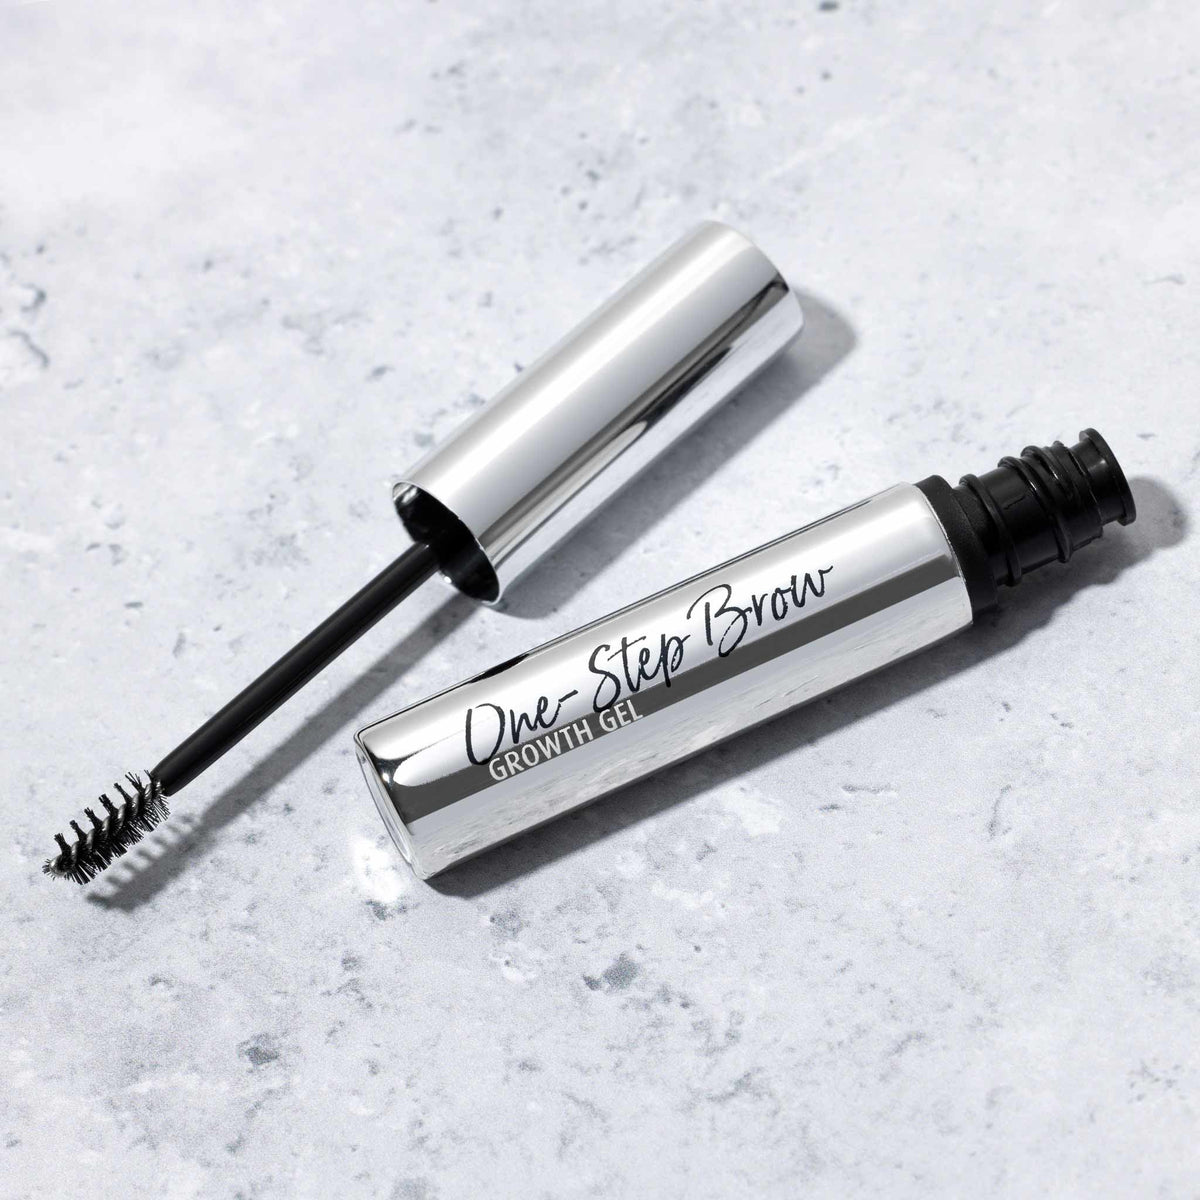 Lune+Aster One-Step Brow Growth Gel . This product is in the color clear